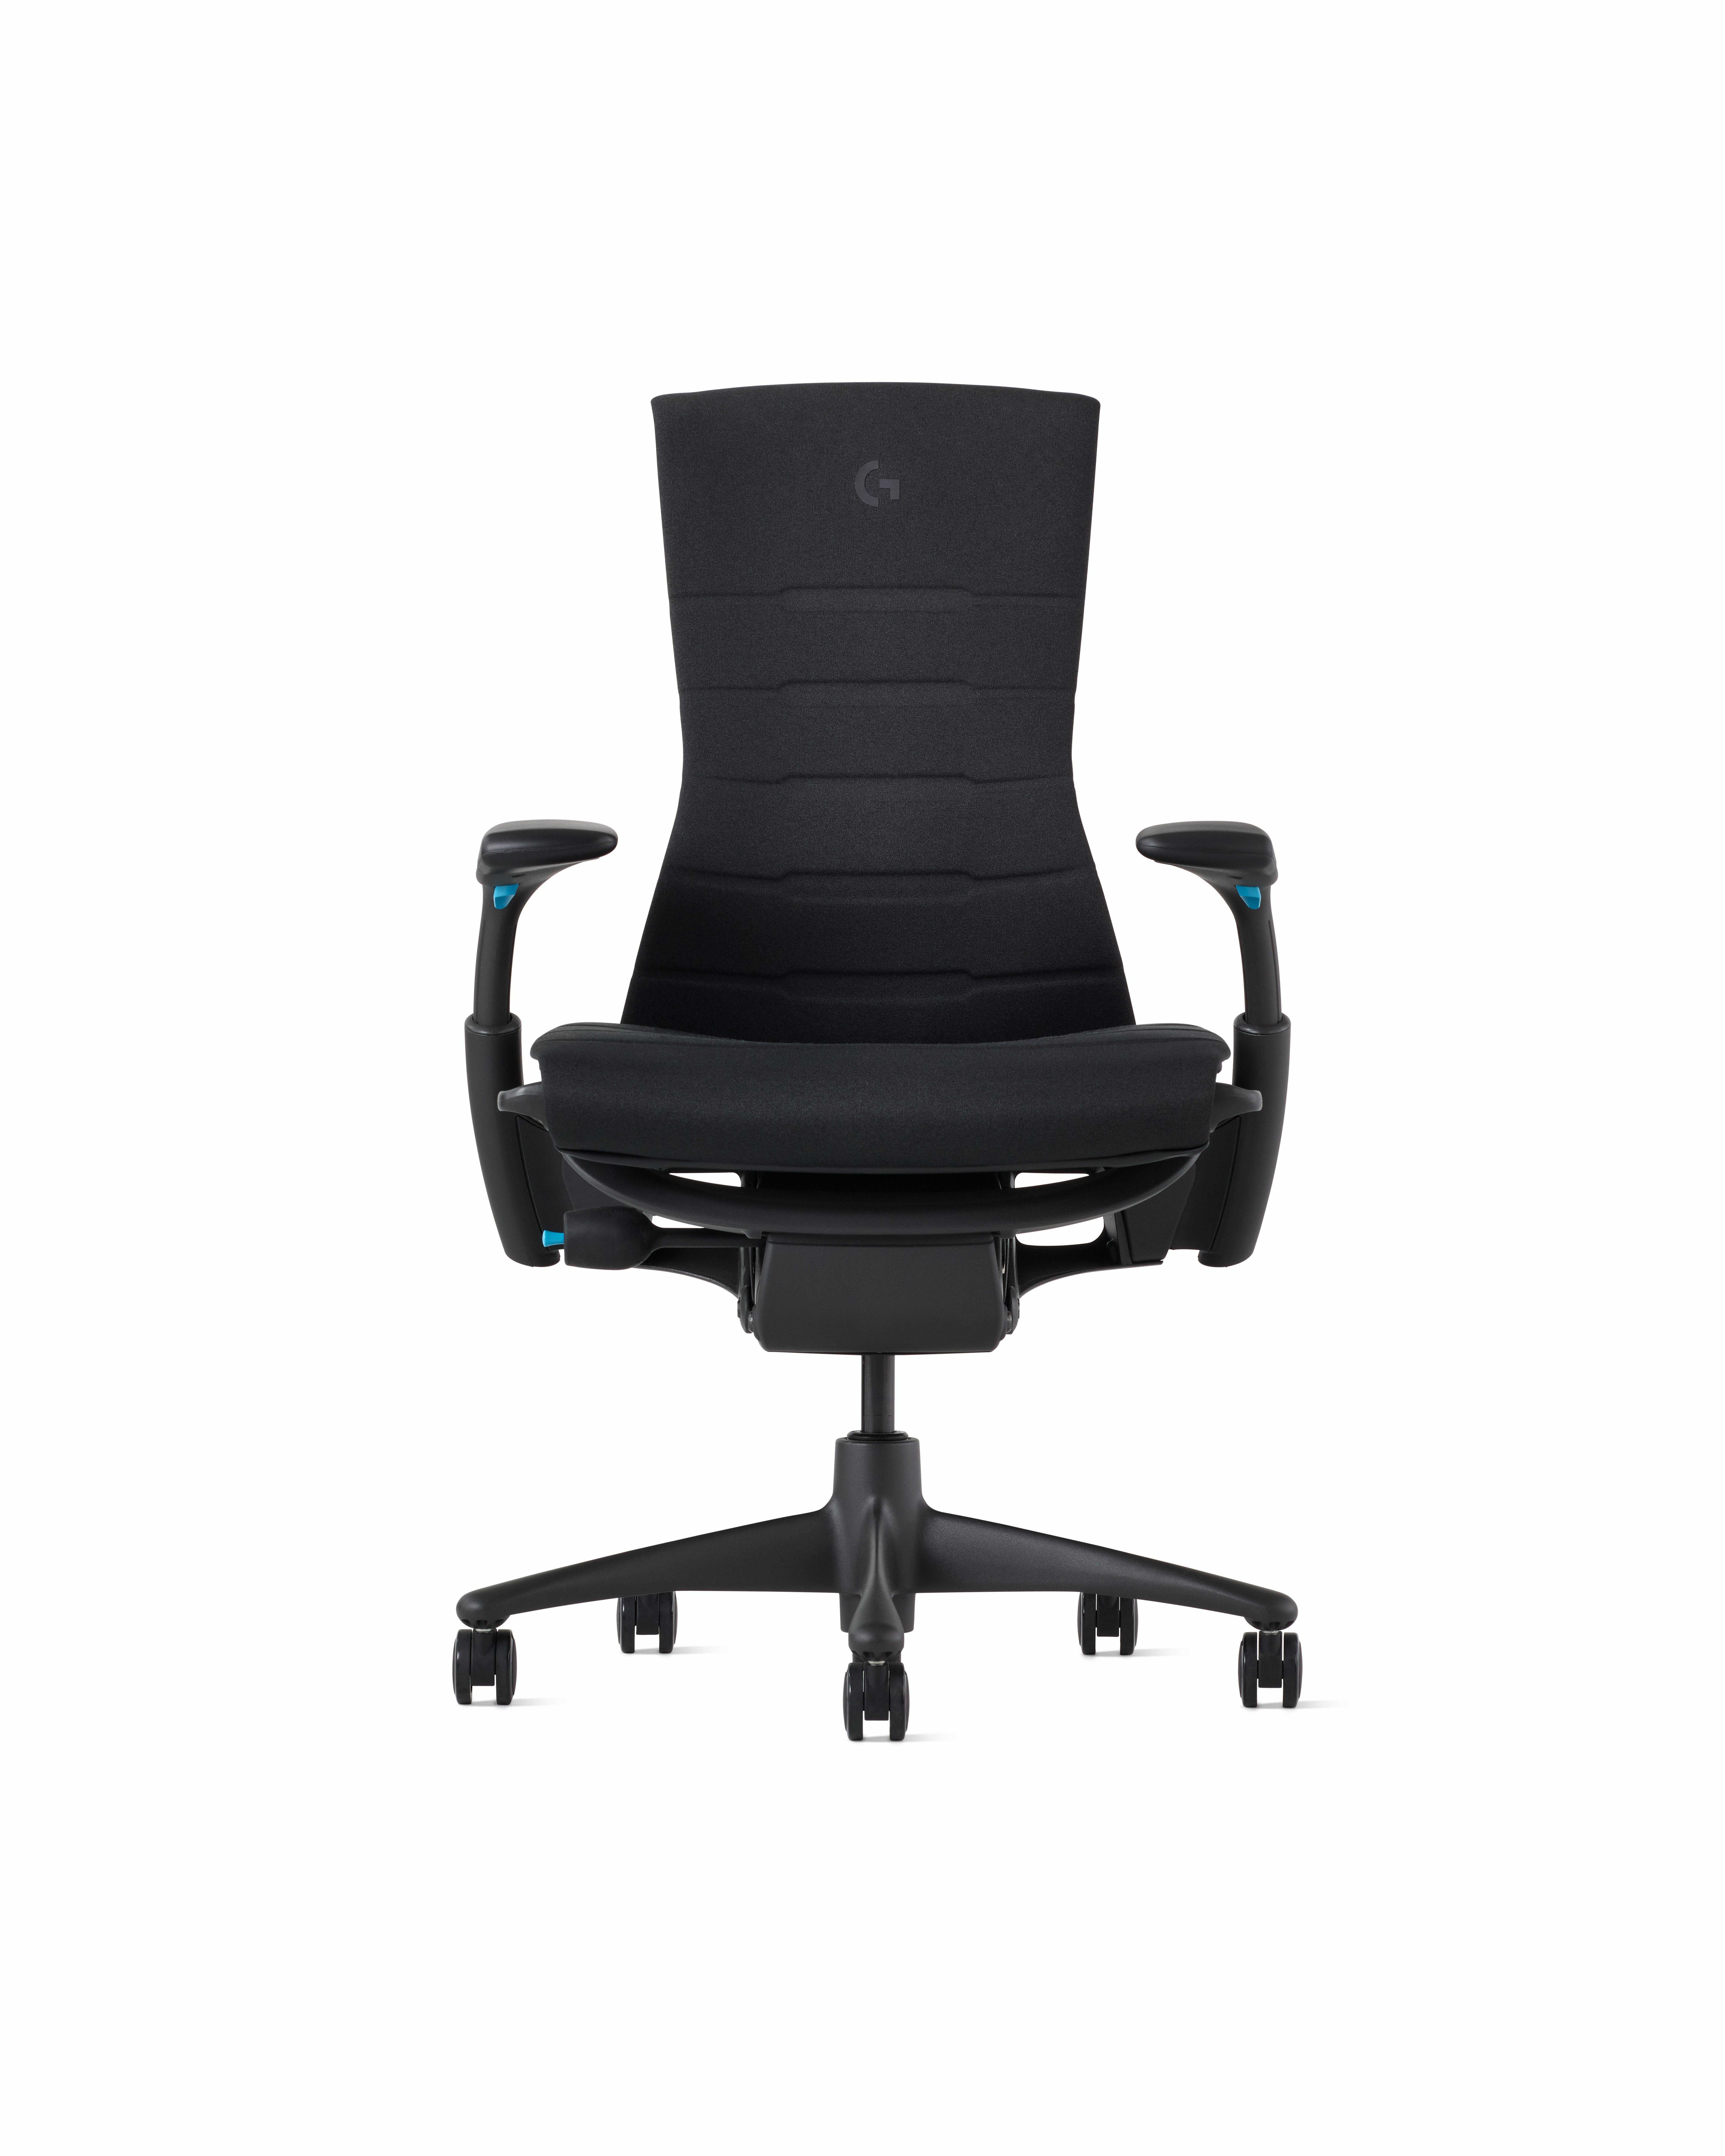 Creatice Logitech Gaming Chair Herman Miller for Small Space